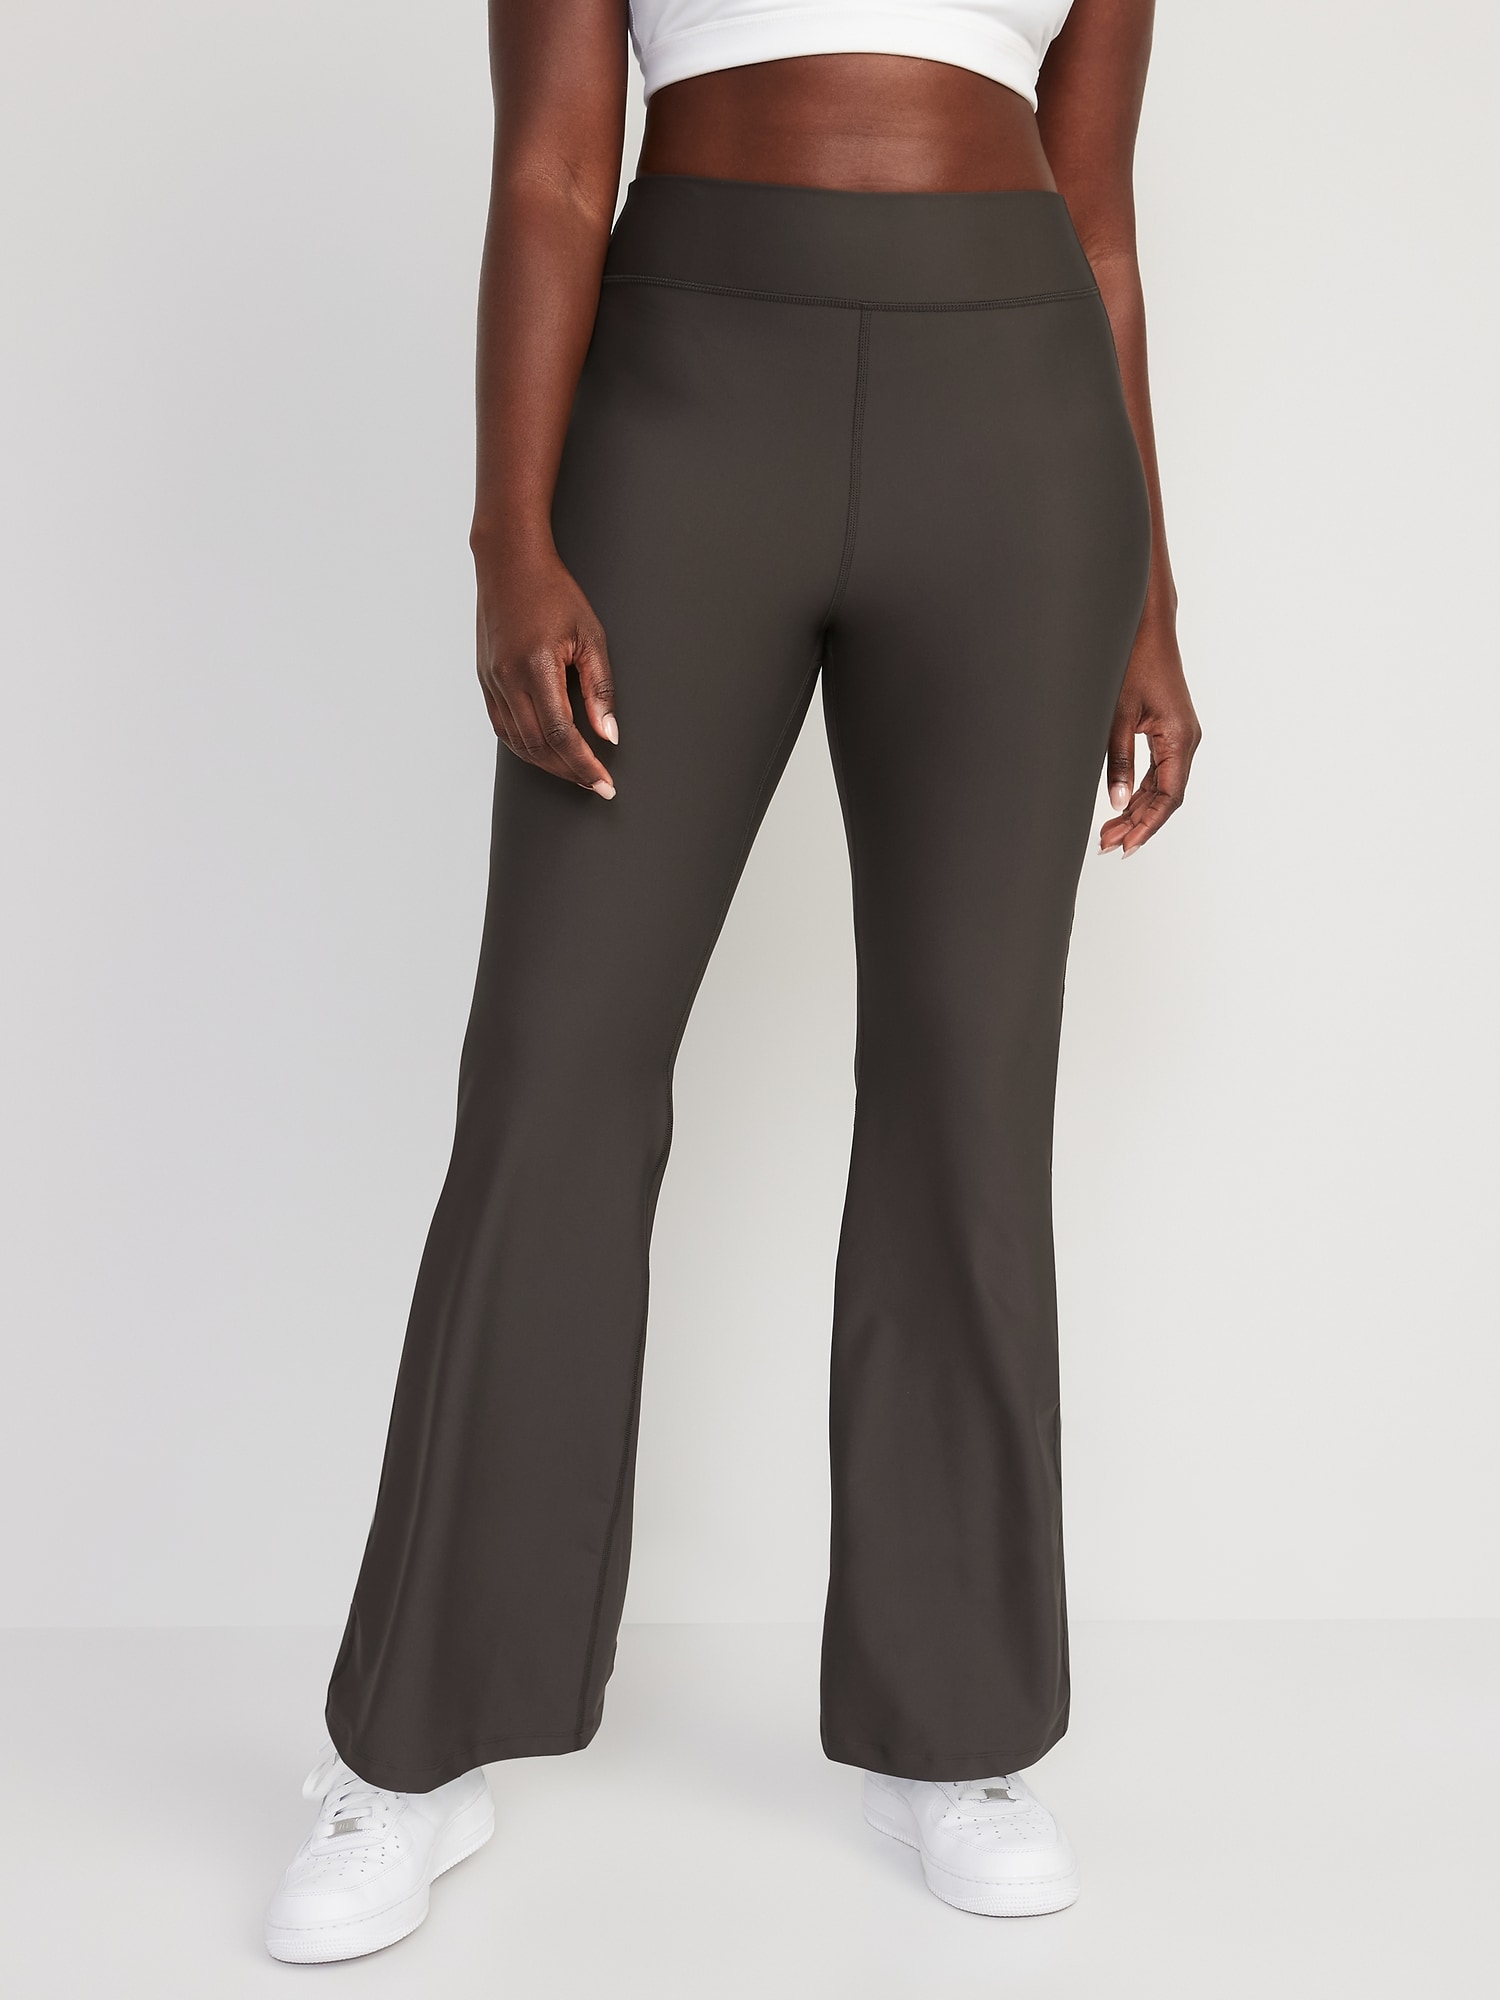 Old Navy - Extra High-Waisted PowerSoft Leggings for Women gray